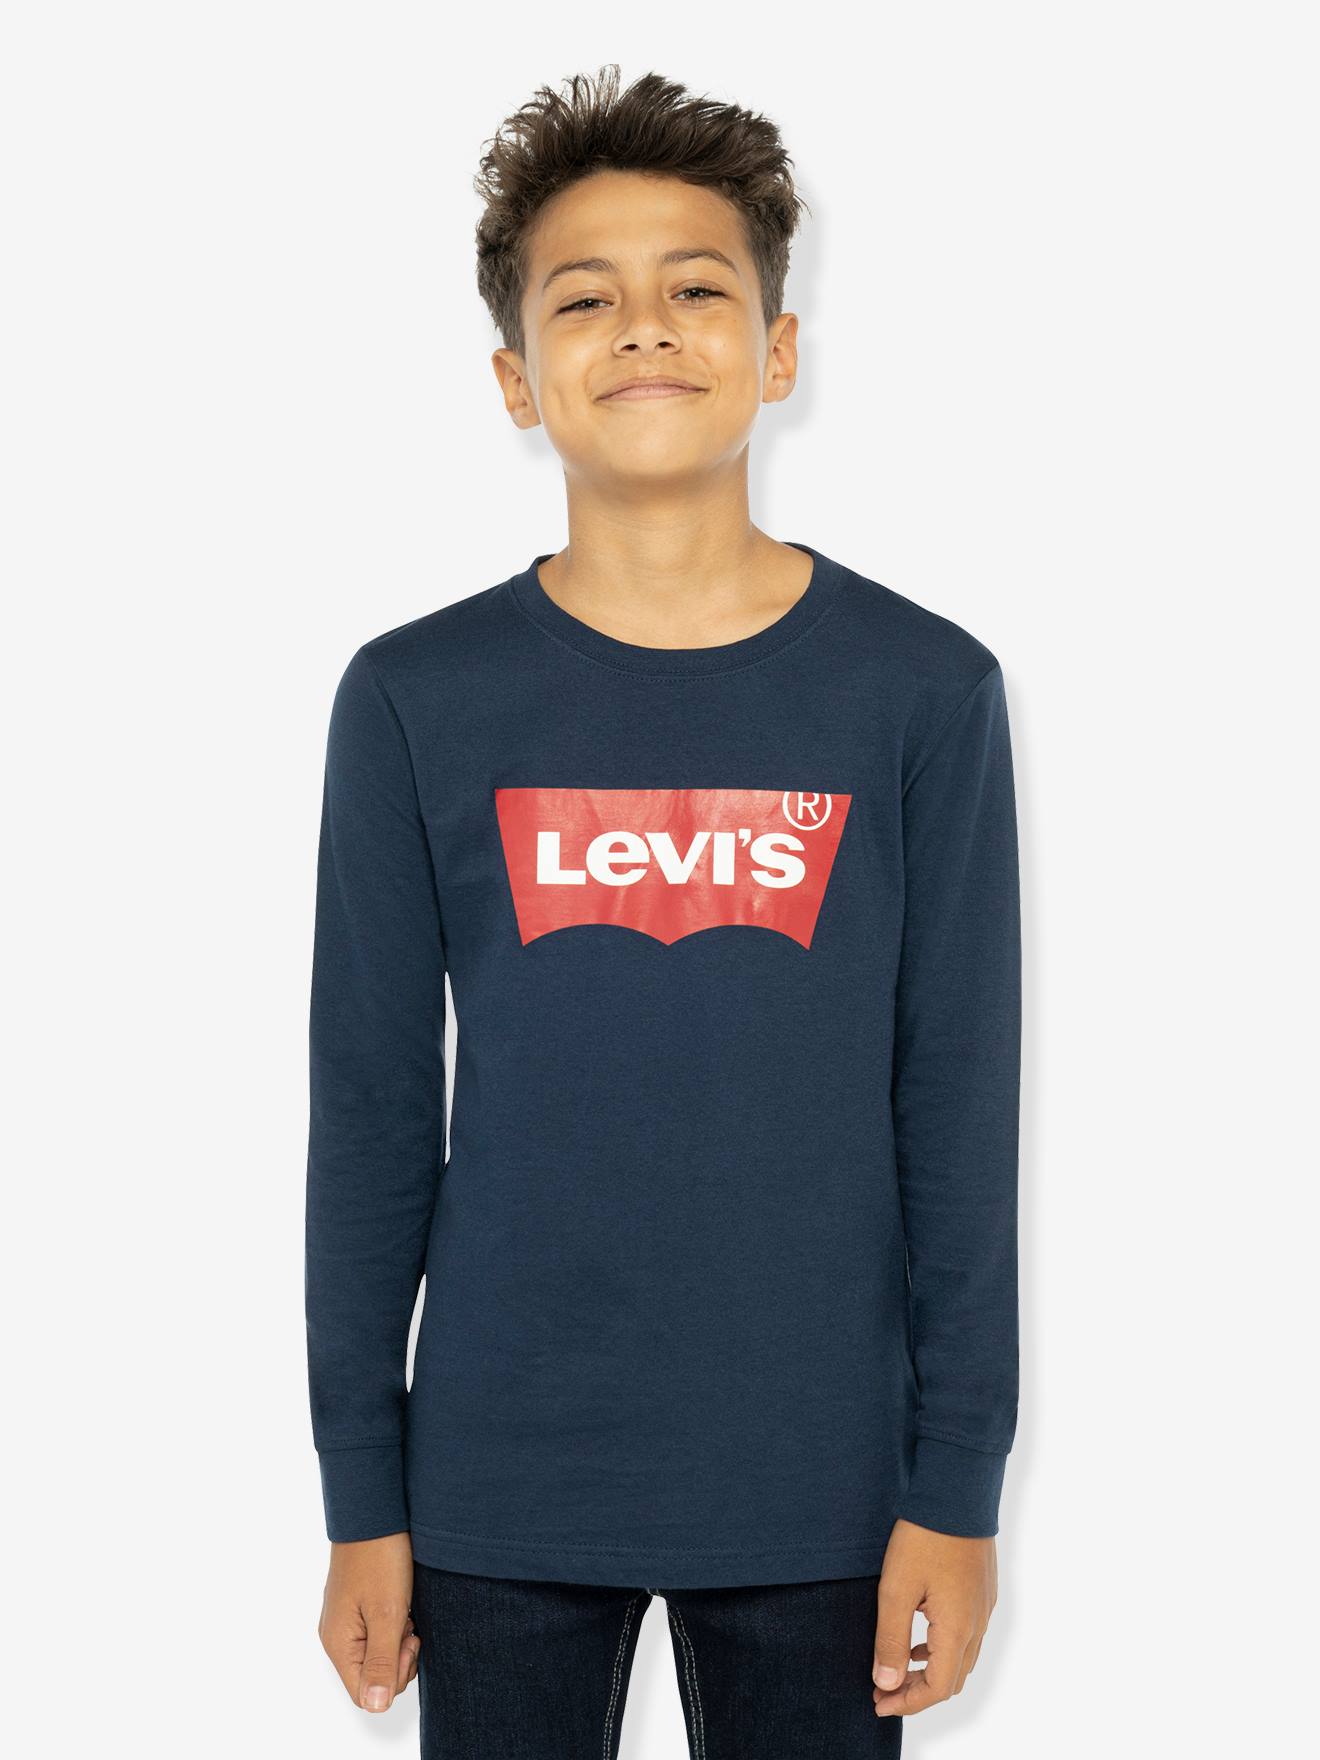 Batwing Top by Levi’s(r) navy blue